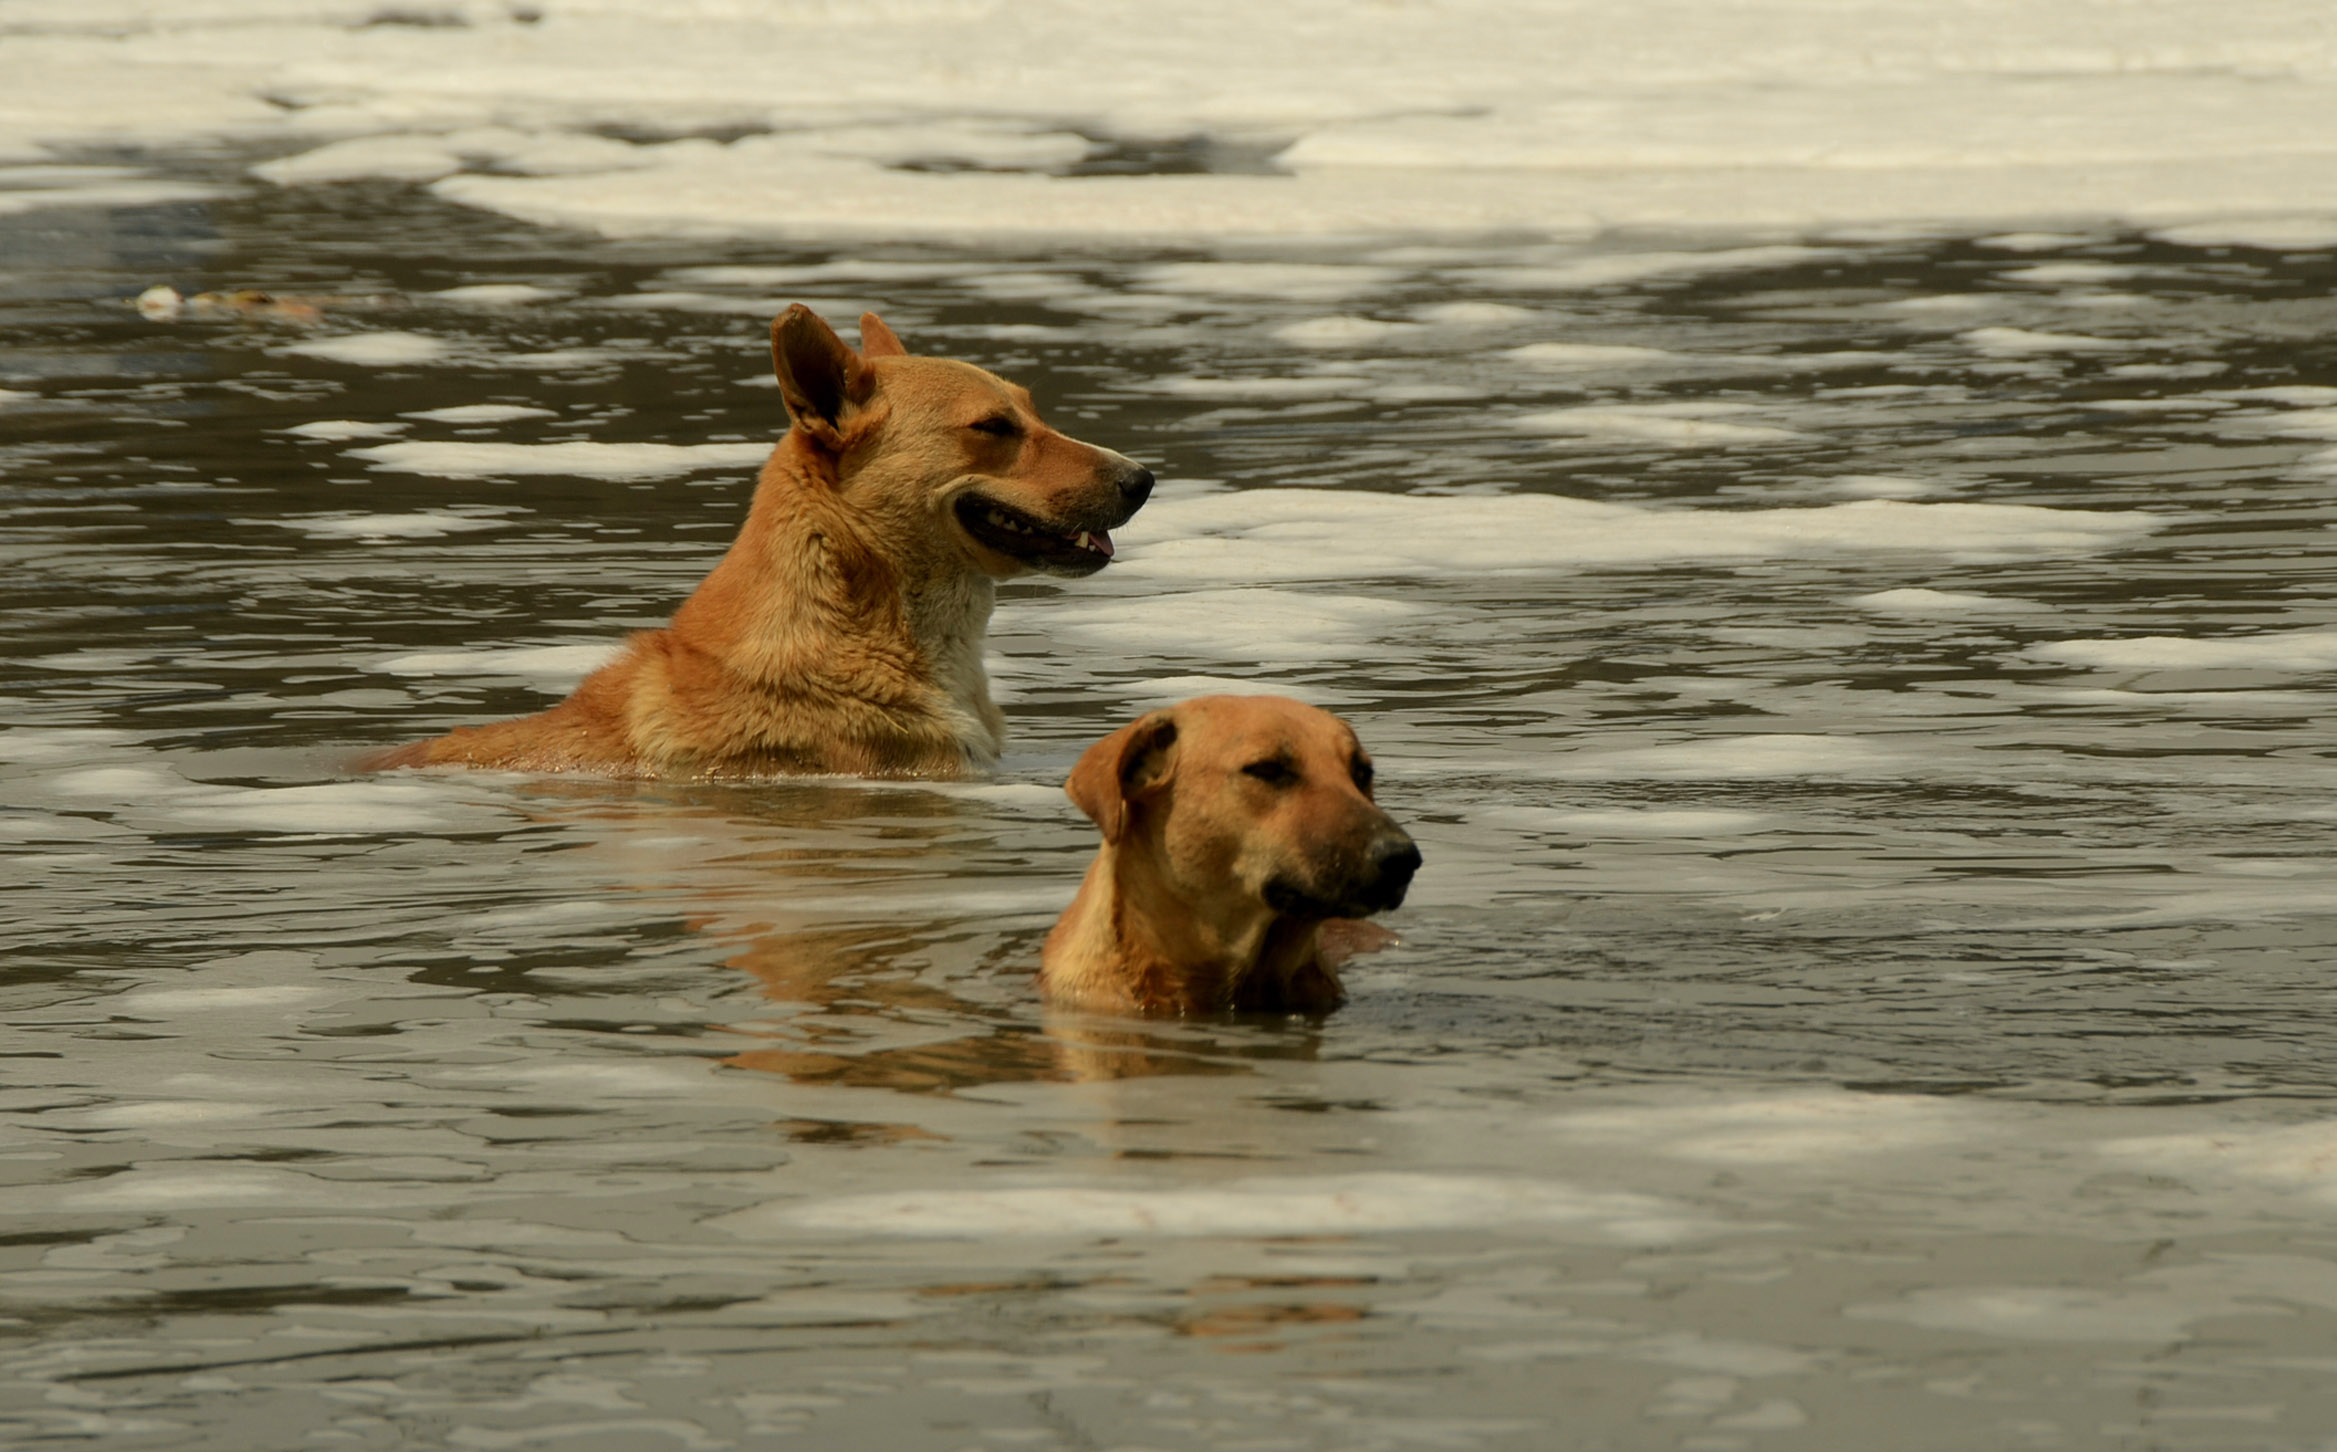 Yamuna River is a swimming pool for respite from heat for the dogs